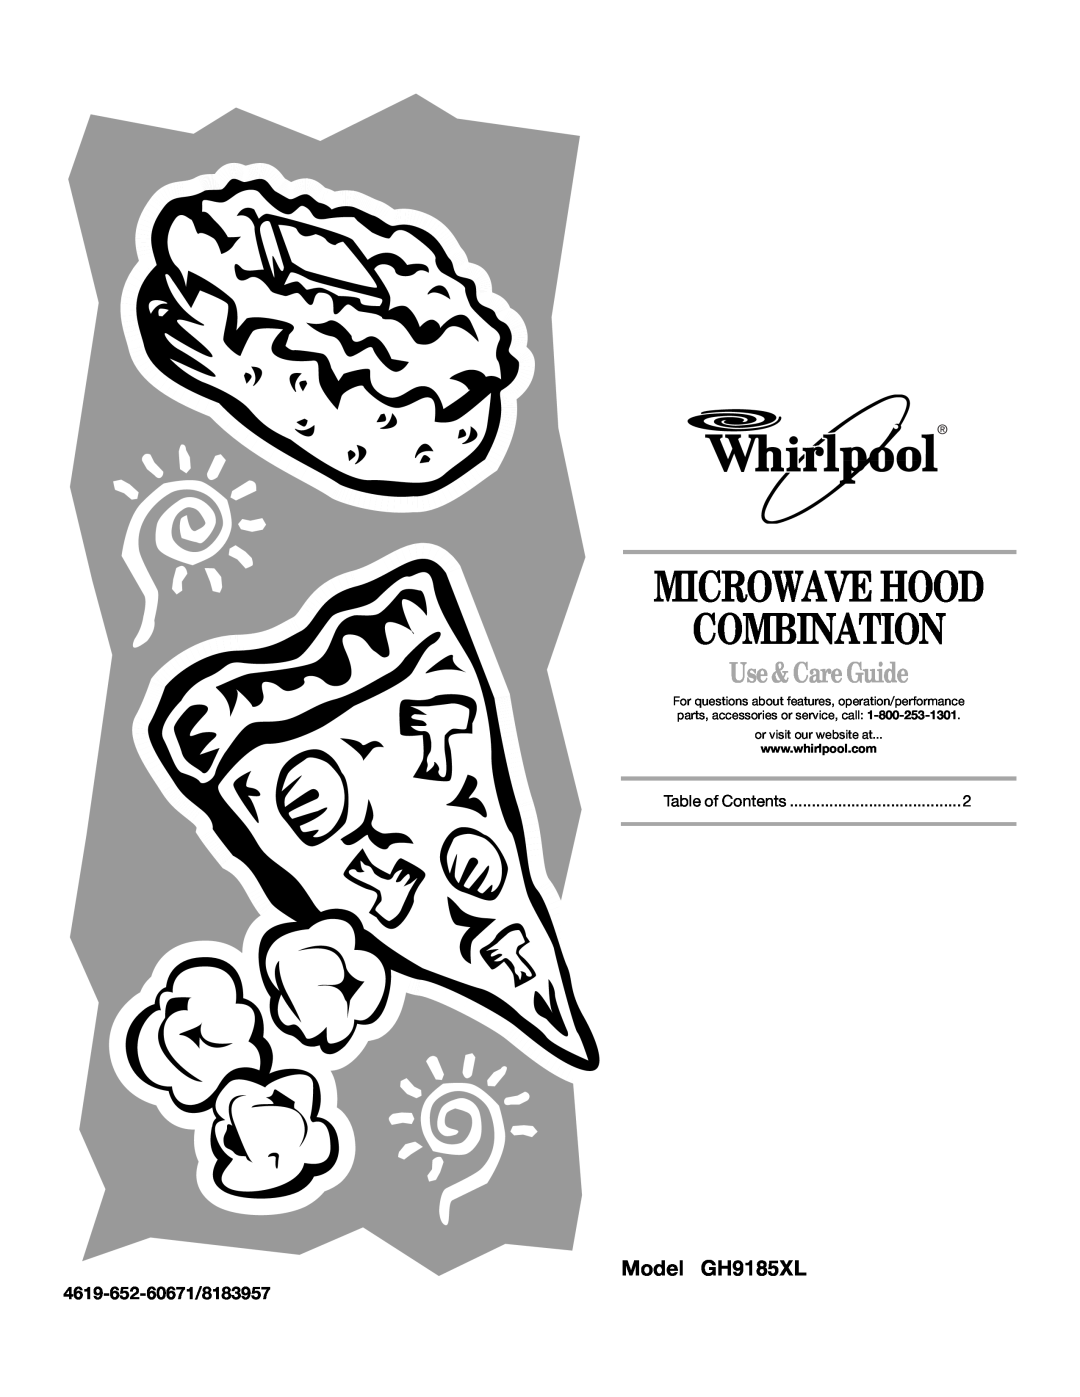 Whirlpool manual Microwave Hood Combination, Use & Care Guide, Model GH9185XL, or visit our website at 